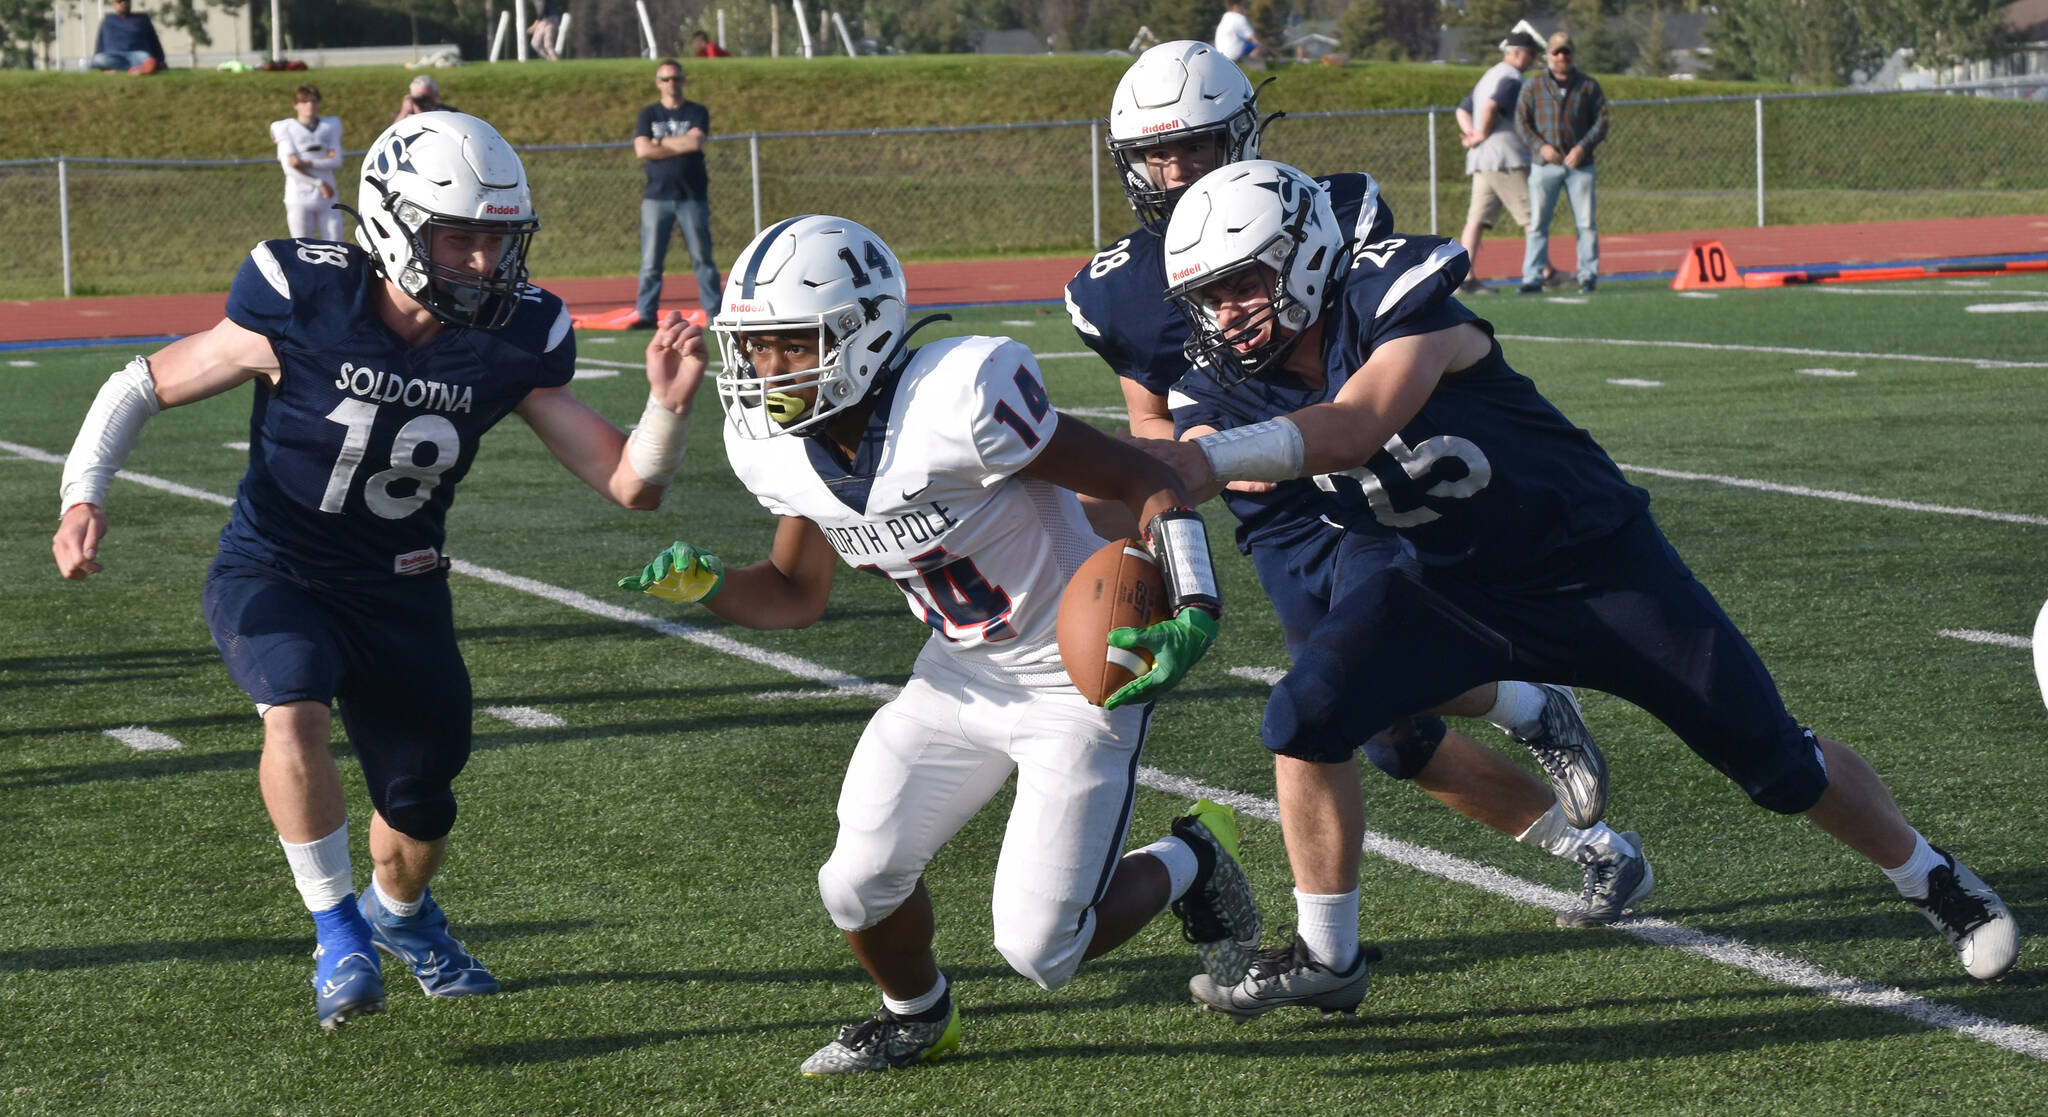 Soldotna’s Collin Peck and Gehret Medcoff track down North Pole’s Devon Cooper-Jackson on Friday, Aug. 18, 2023, at Justin Maile Field at Soldotna High School in Soldotna, Alaska. (Photo by Jeff Helminiak/Peninsula Clarion)